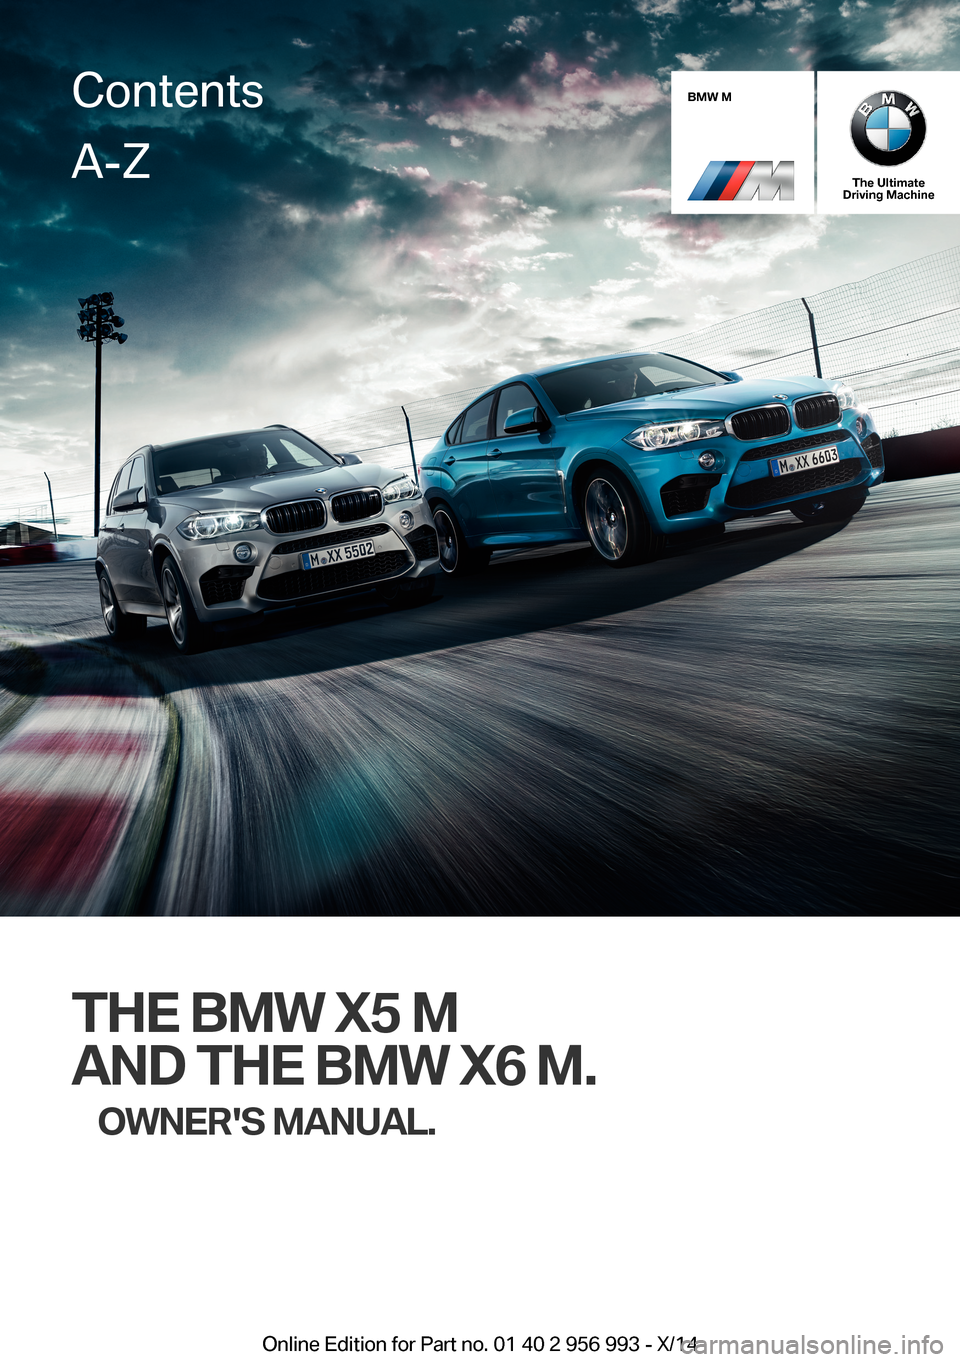 BMW X5M 2014 F85 Owners Manual BMW M
The UltimateDriving Machine
THE BMW X5 M
AND THE BMW X6 M.
OWNERS MANUAL.
ContentsA-Z
Online Edition for Part no. 01 40 2 956 993 - X/14   